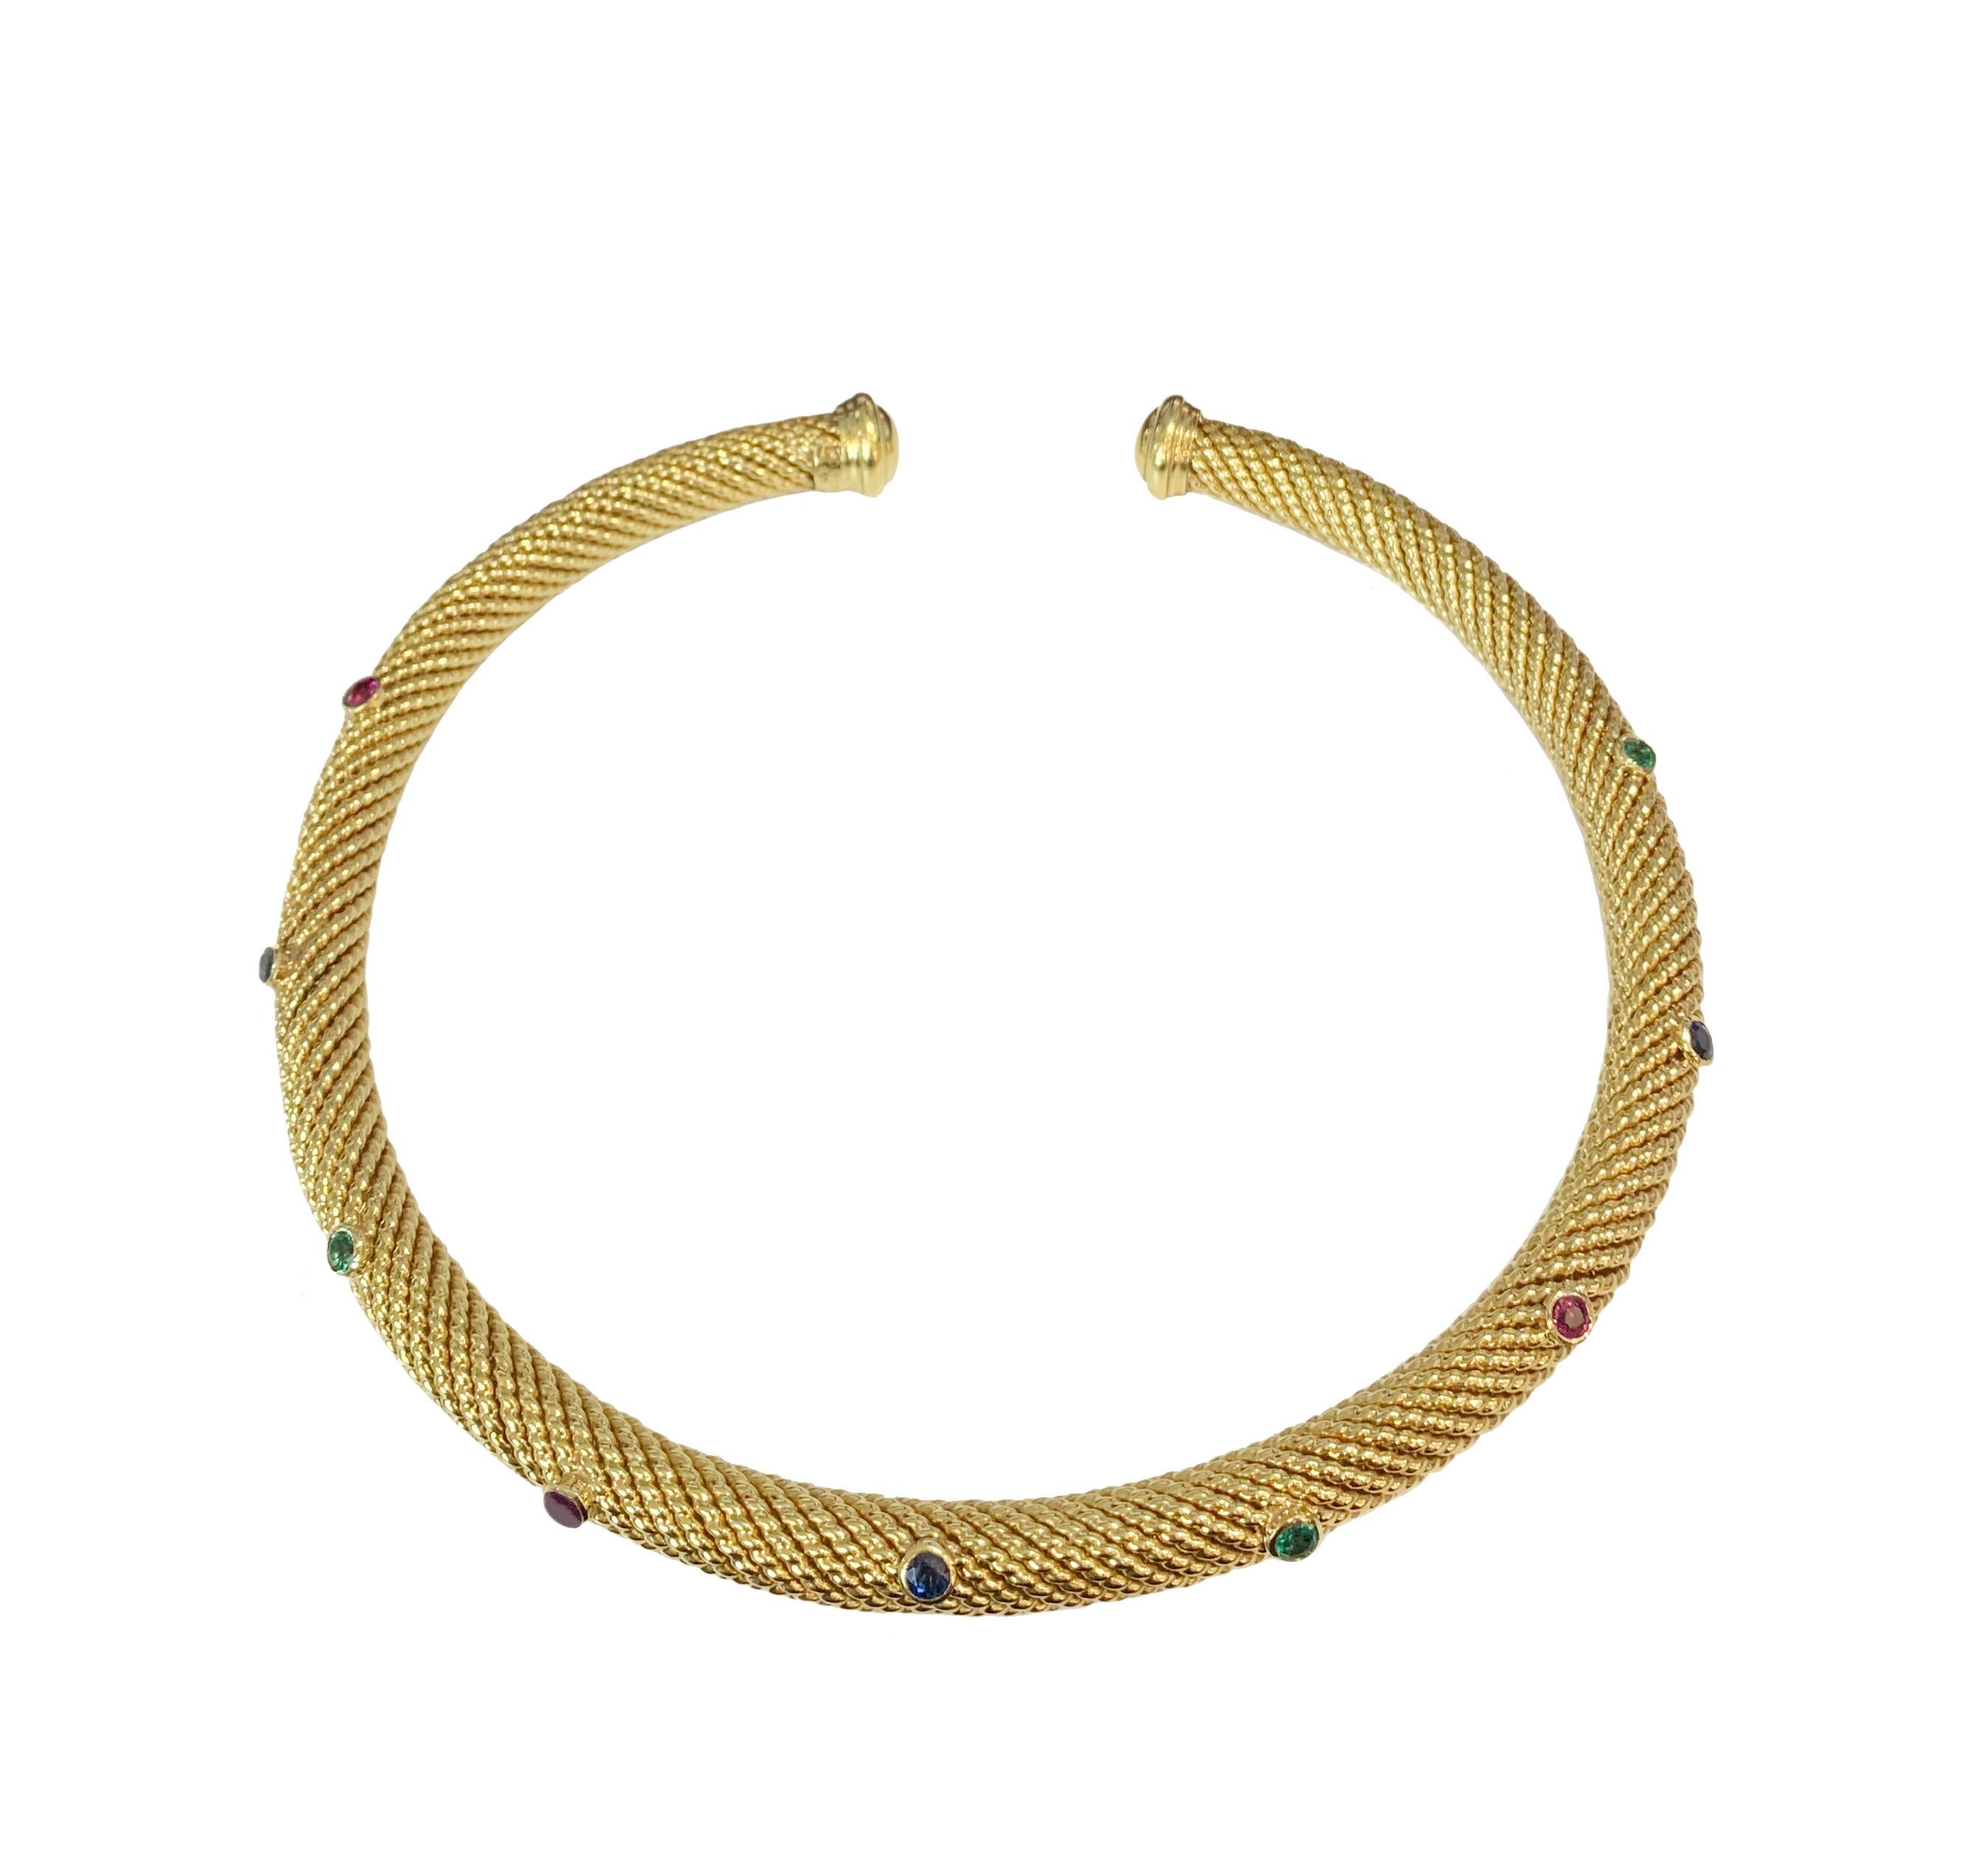 Women's Vintage David Yurman Yellow Gold Choker Necklace with Stones For Sale